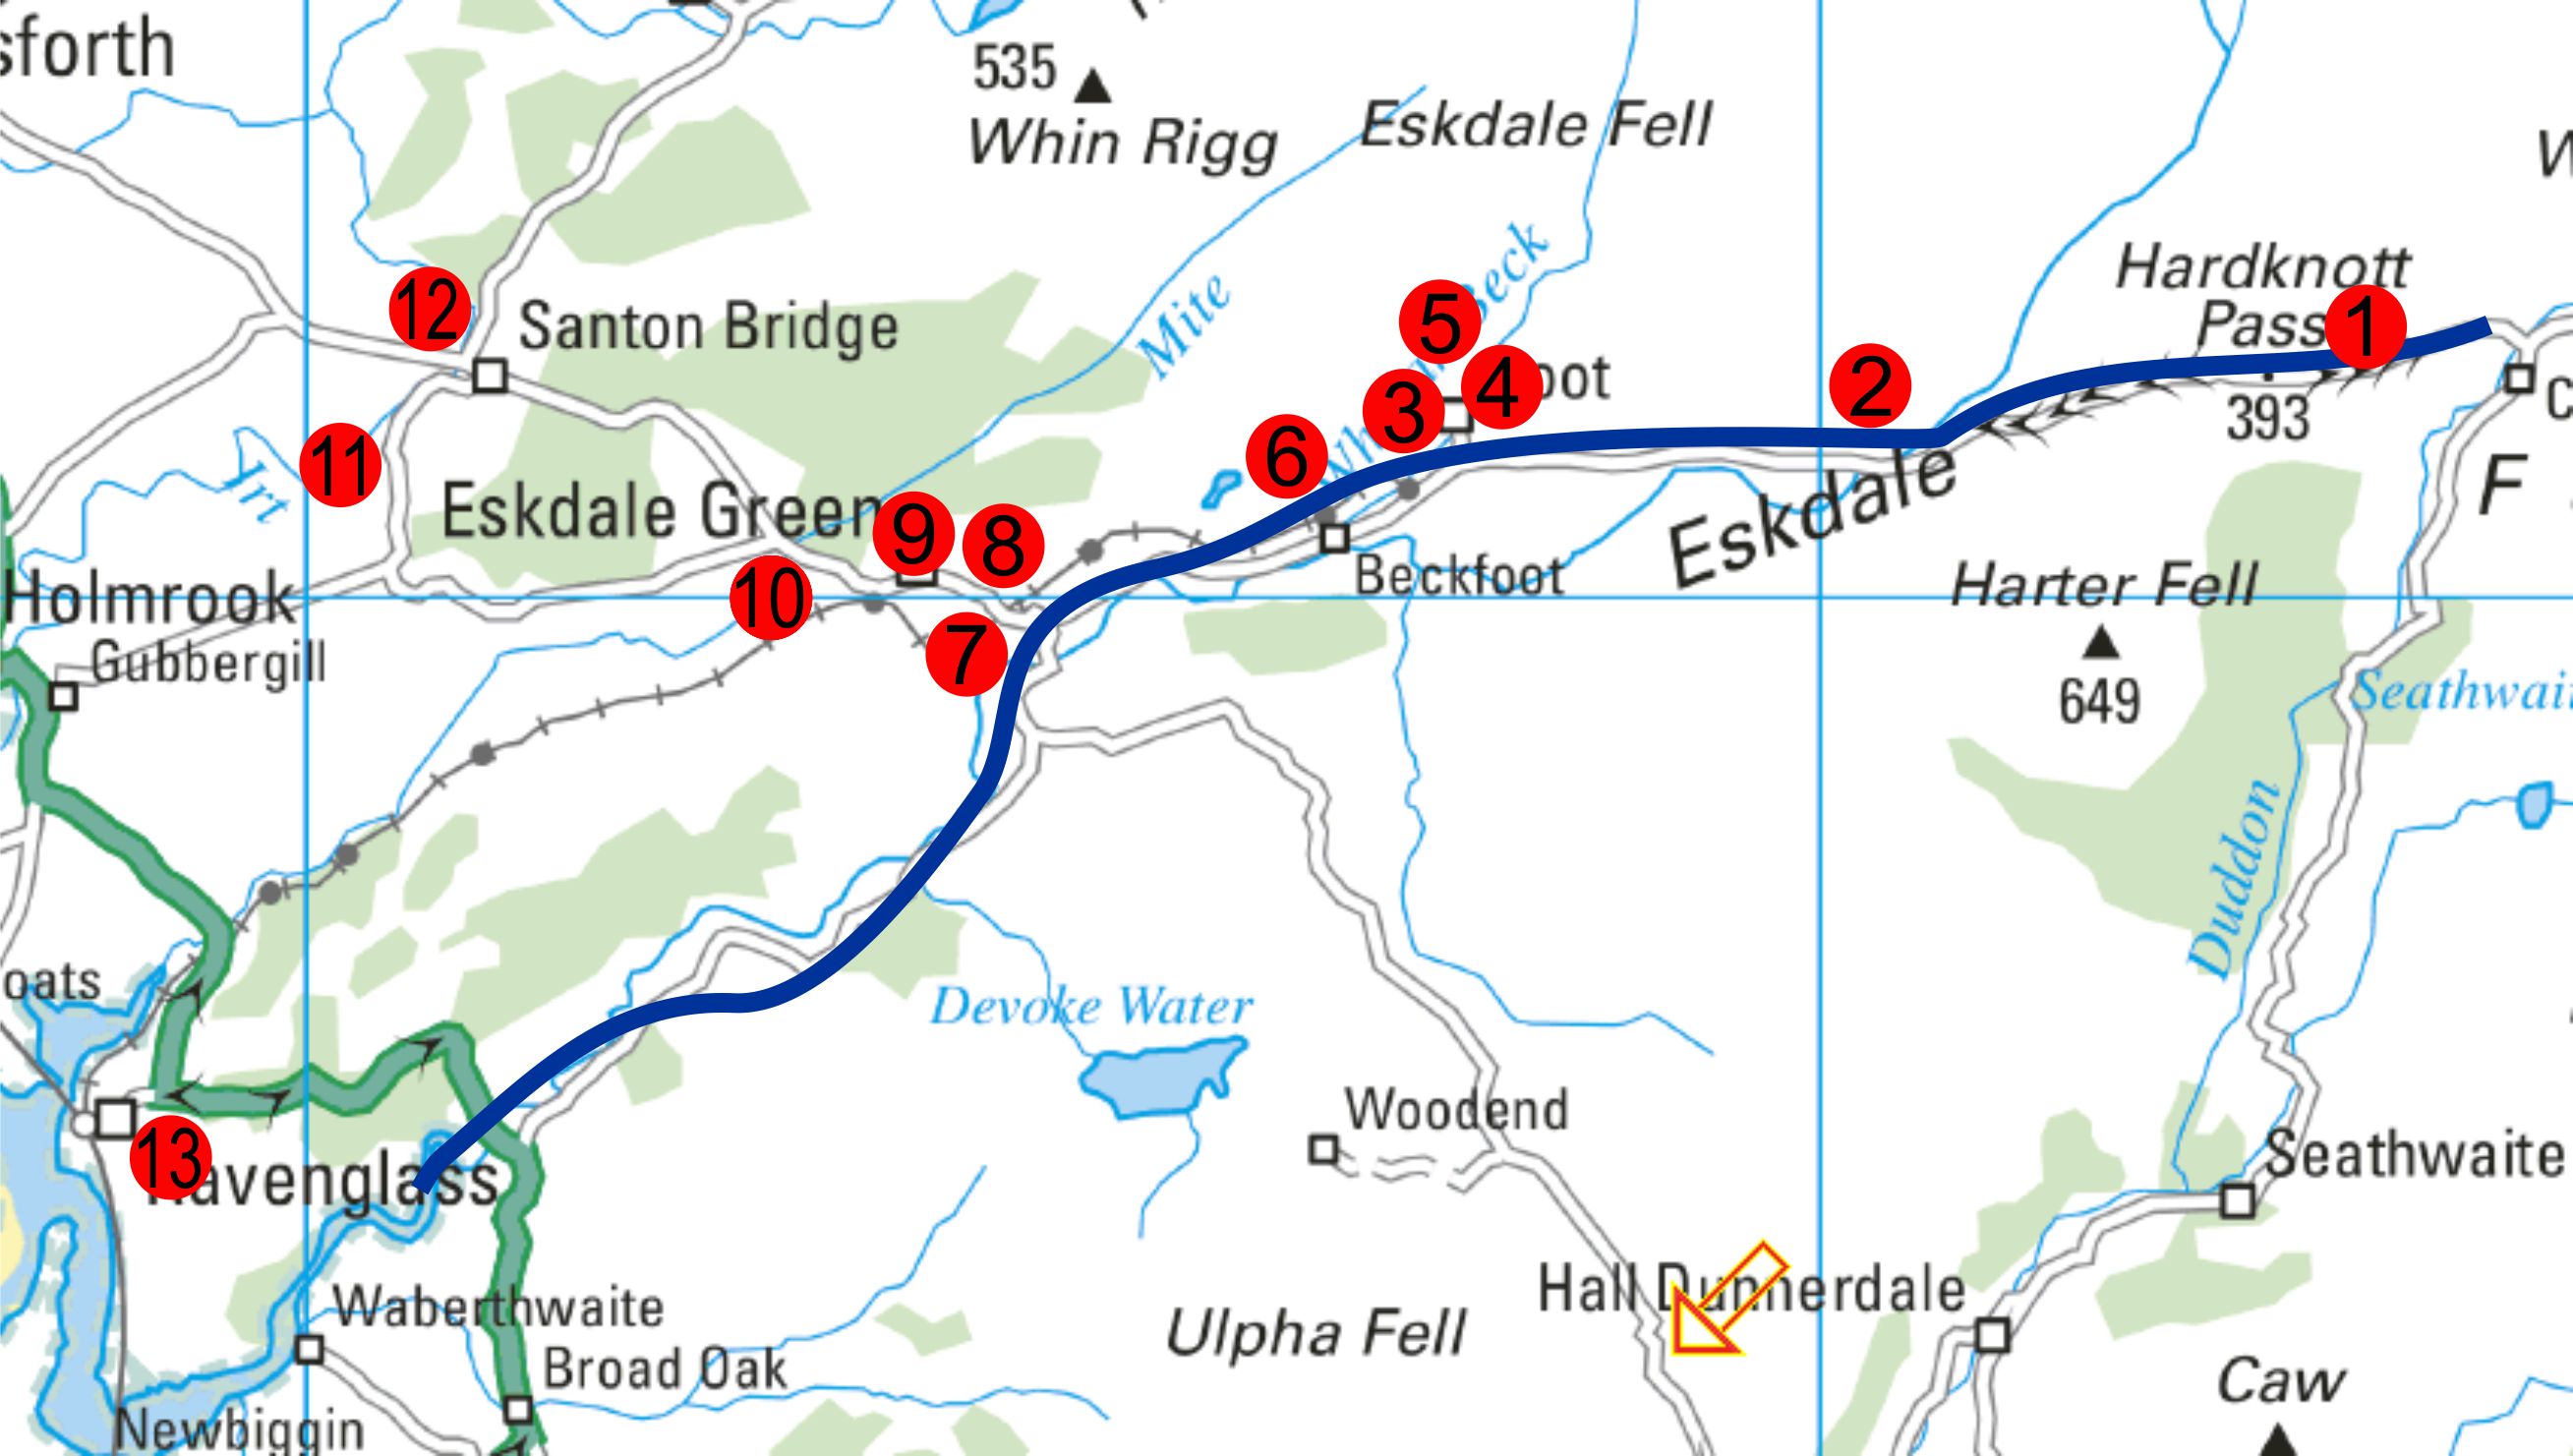 The Eskdale Valley